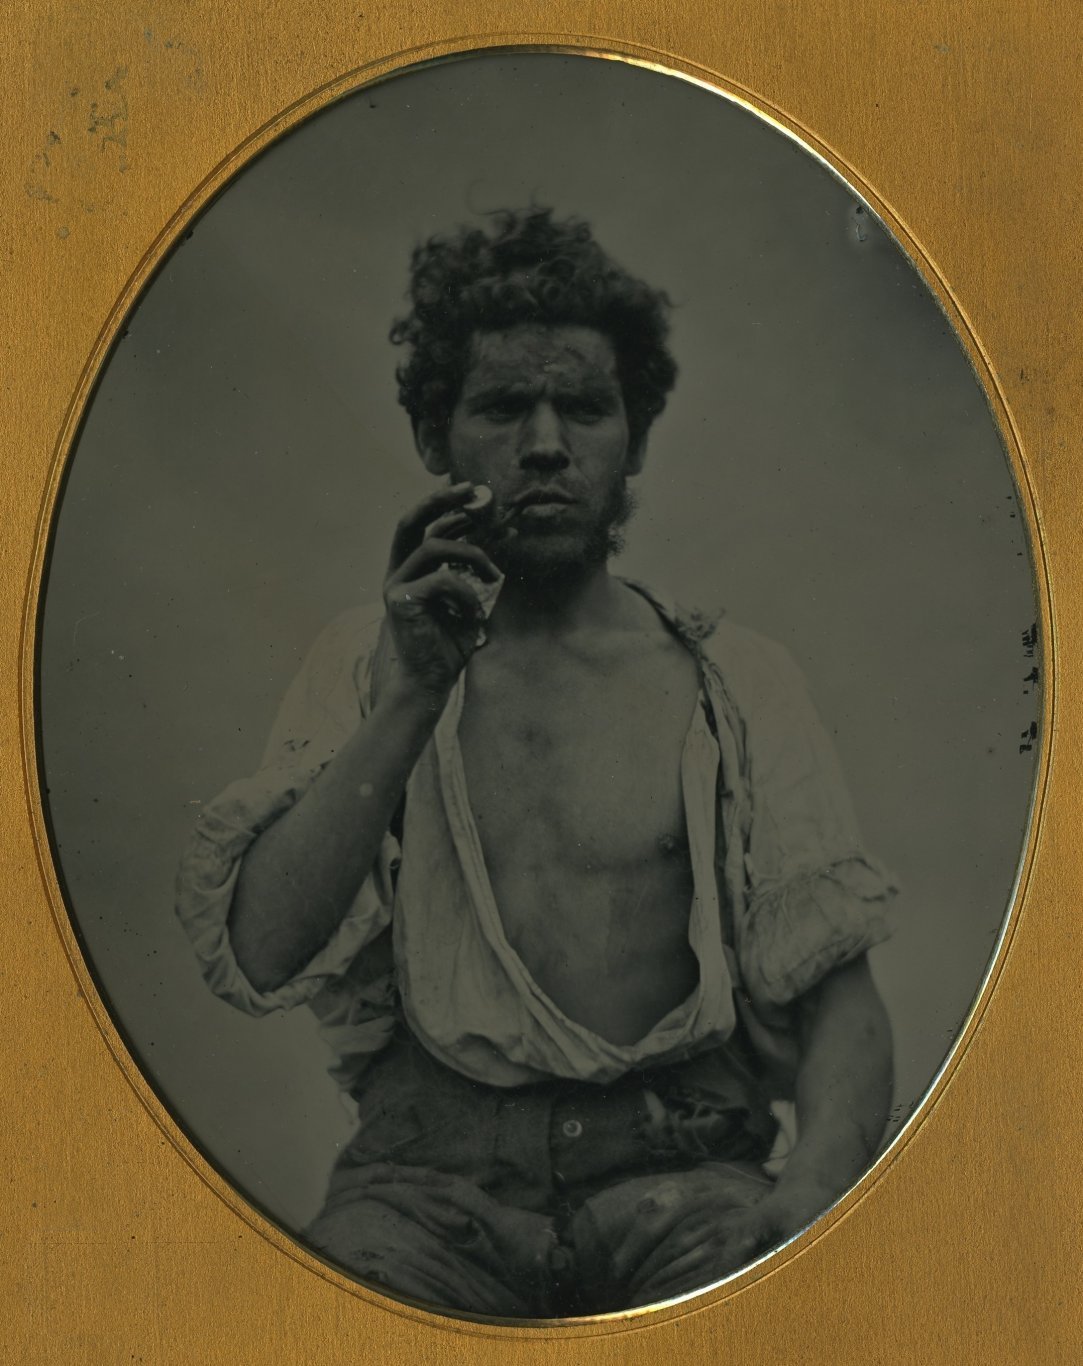 irish labourer from the famine time